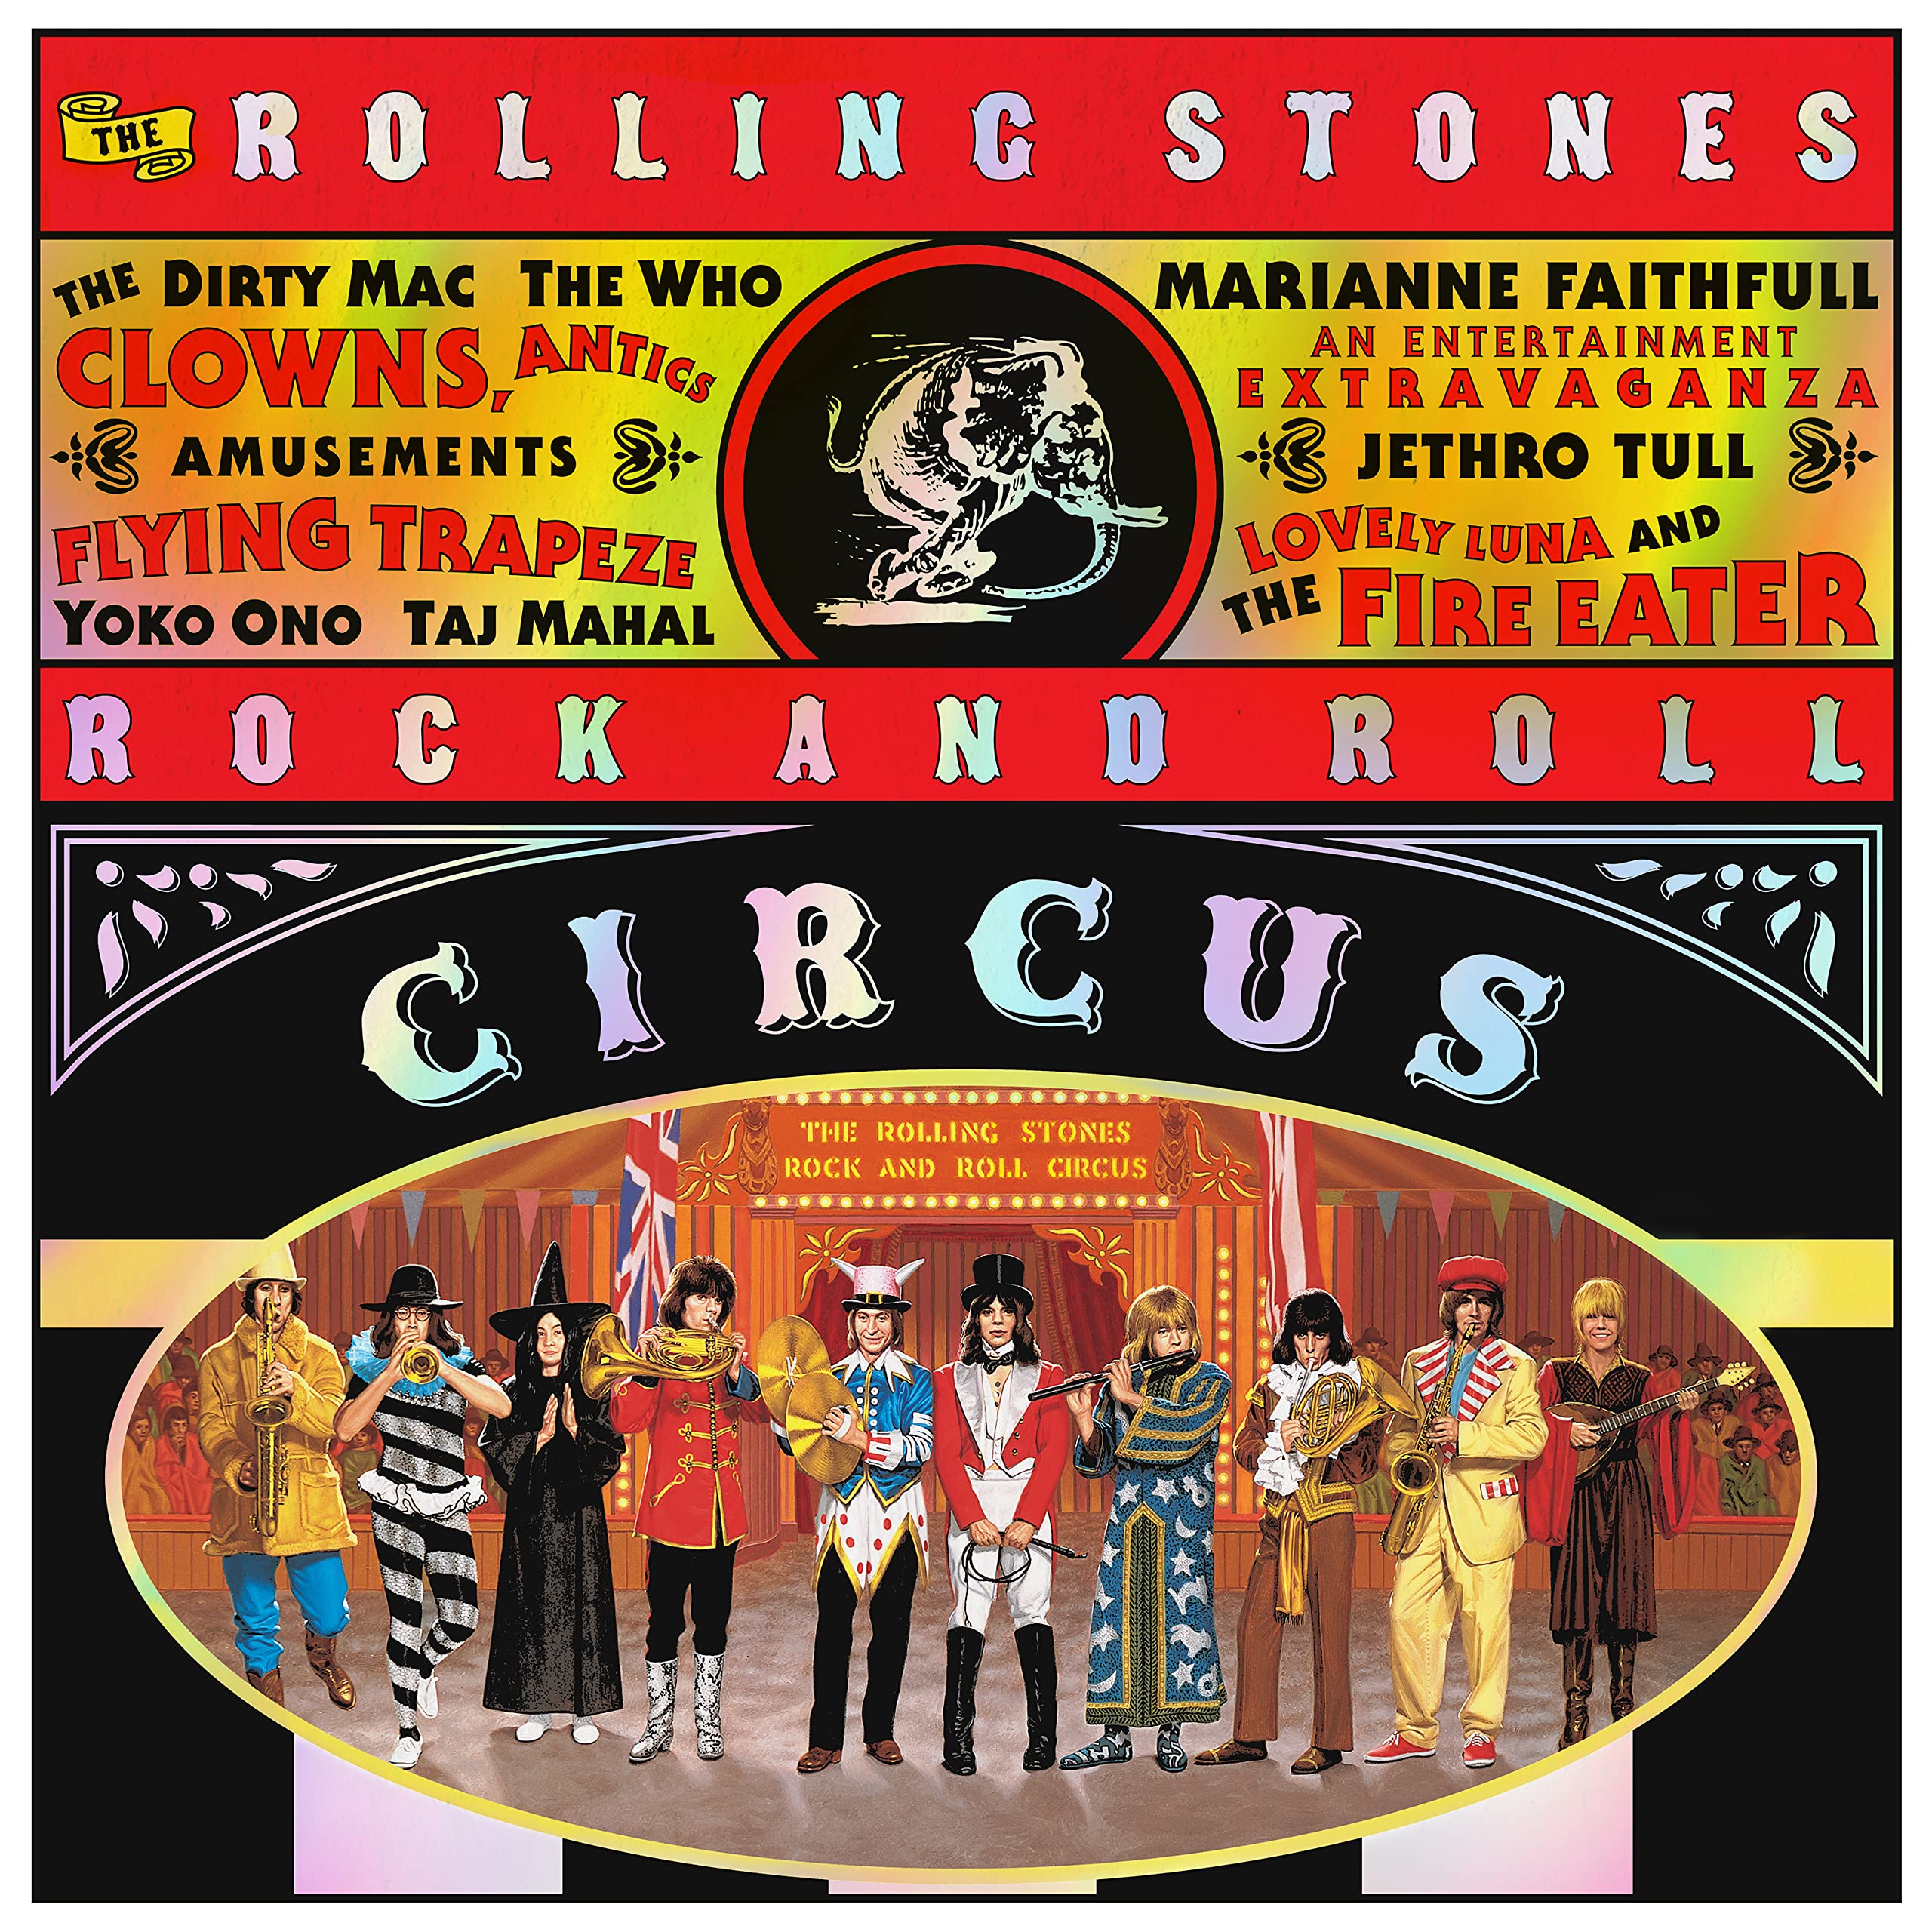 THE ROLLING STONES ROCK AND ROLL CIRCUS (LIMITED DELUXE EDITION: BLU-RAY/DVD/2CD) on MovieShack